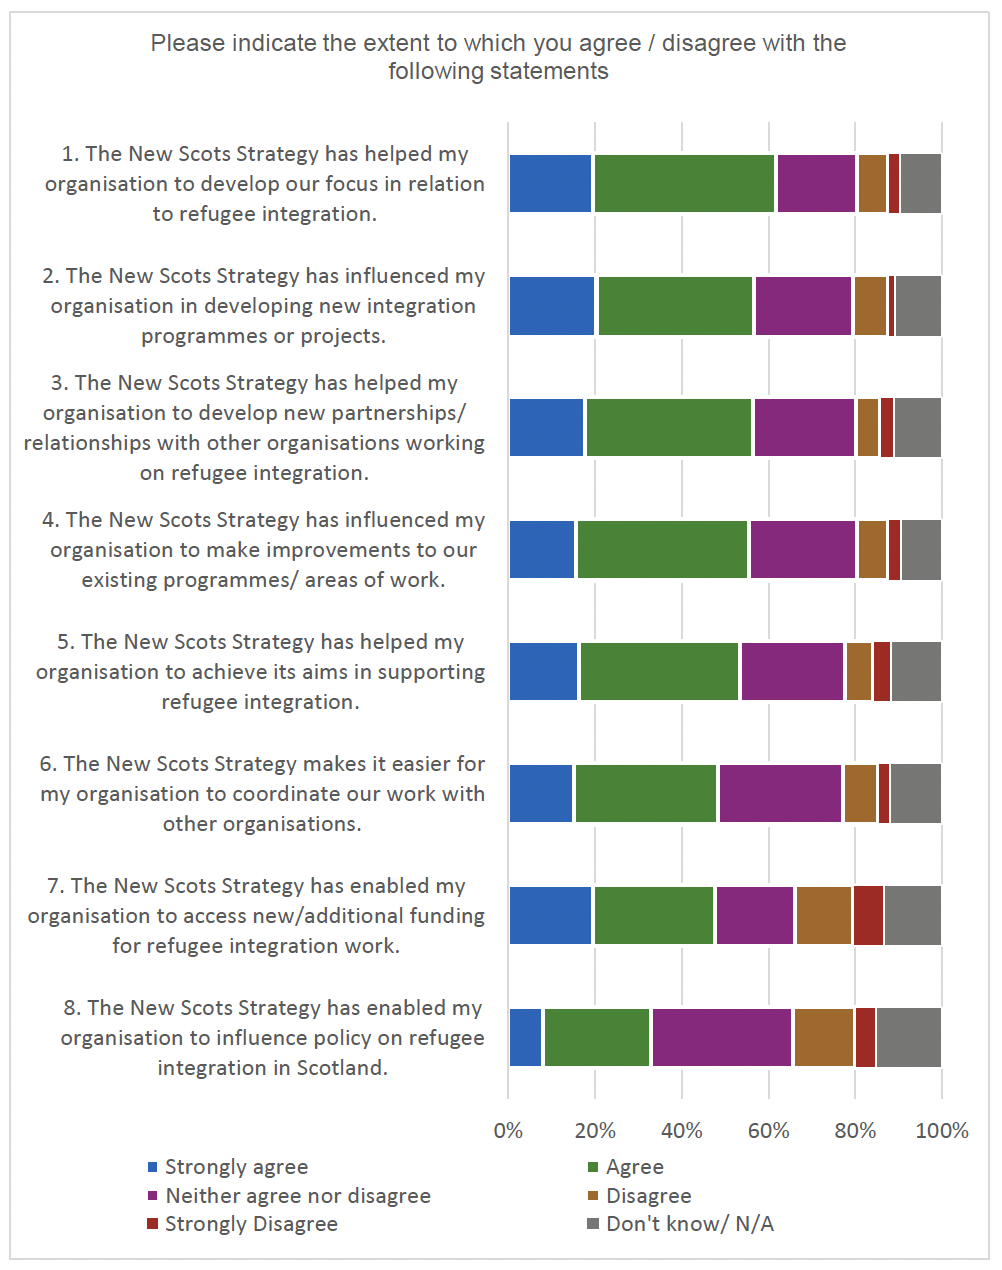 Chart detailing the extent to which respondents agreed with statements on how the New Scots Refugee Integration strategy has been used